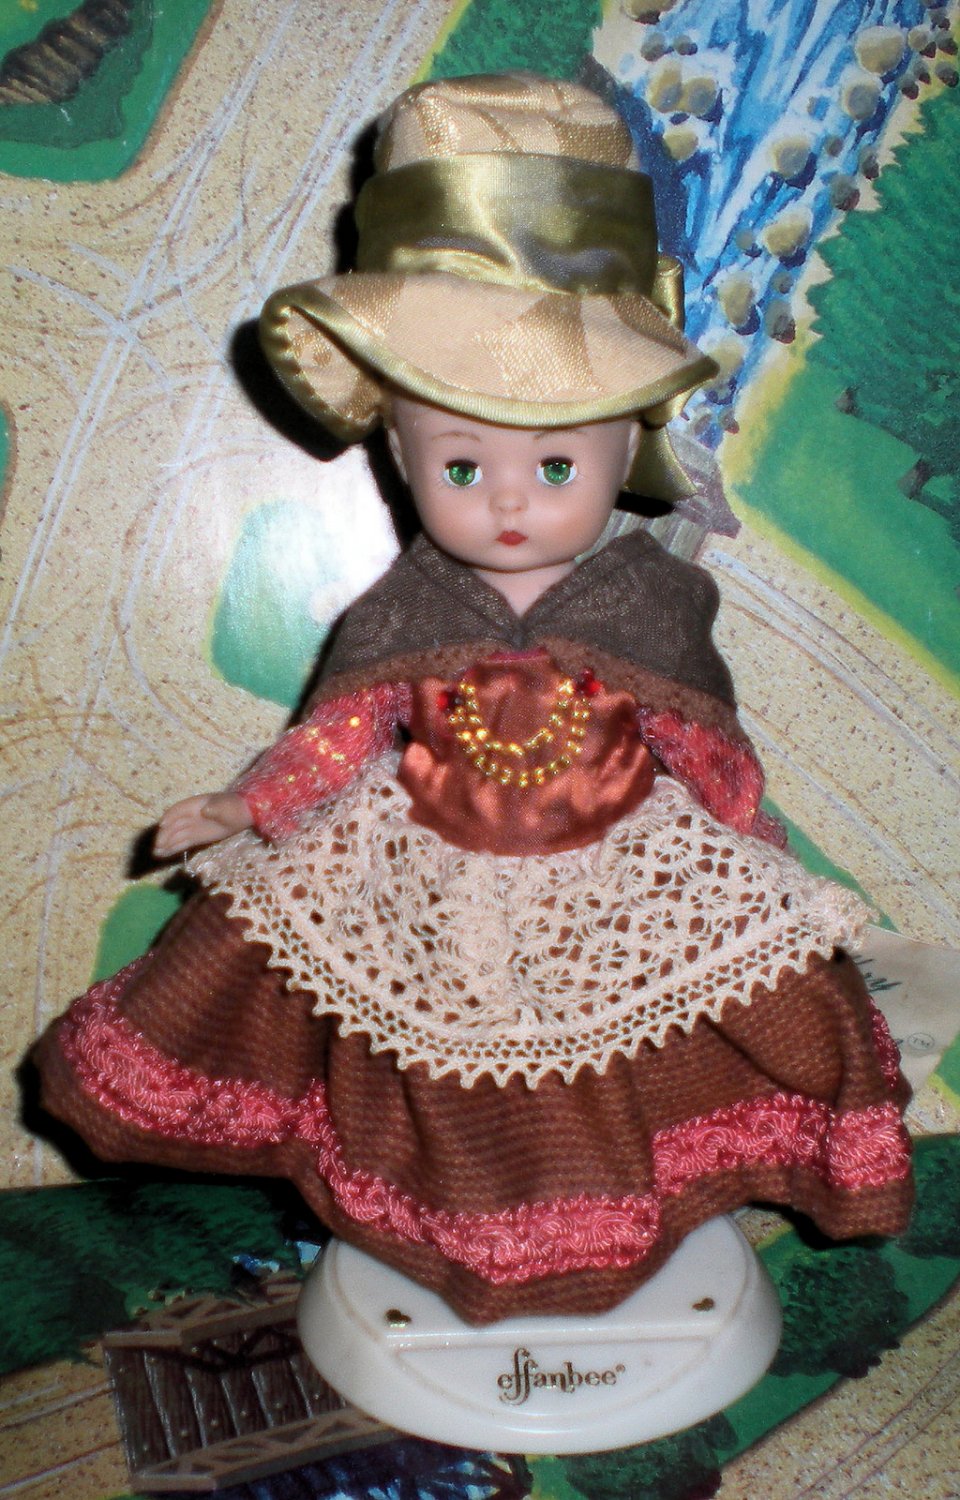 l Mother Goose Doll -Effanbee Doll Co.